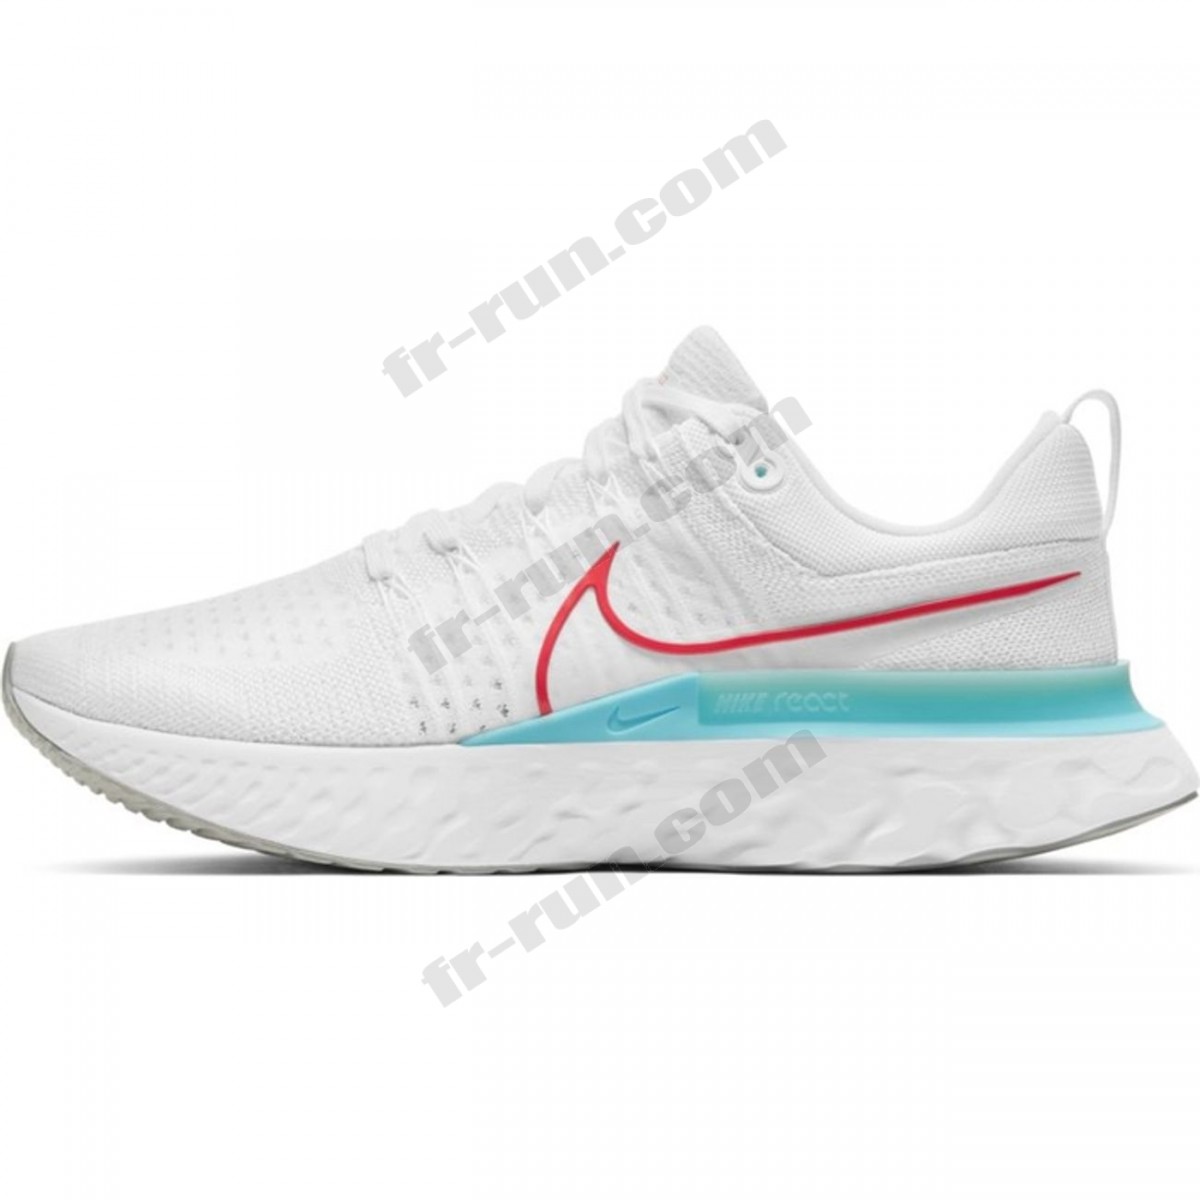 Nike/CHAUSSURES BASSES running homme NIKE NIKE REACT INFINITY RUN FK 2 √ Nouveau style √ Soldes - -1